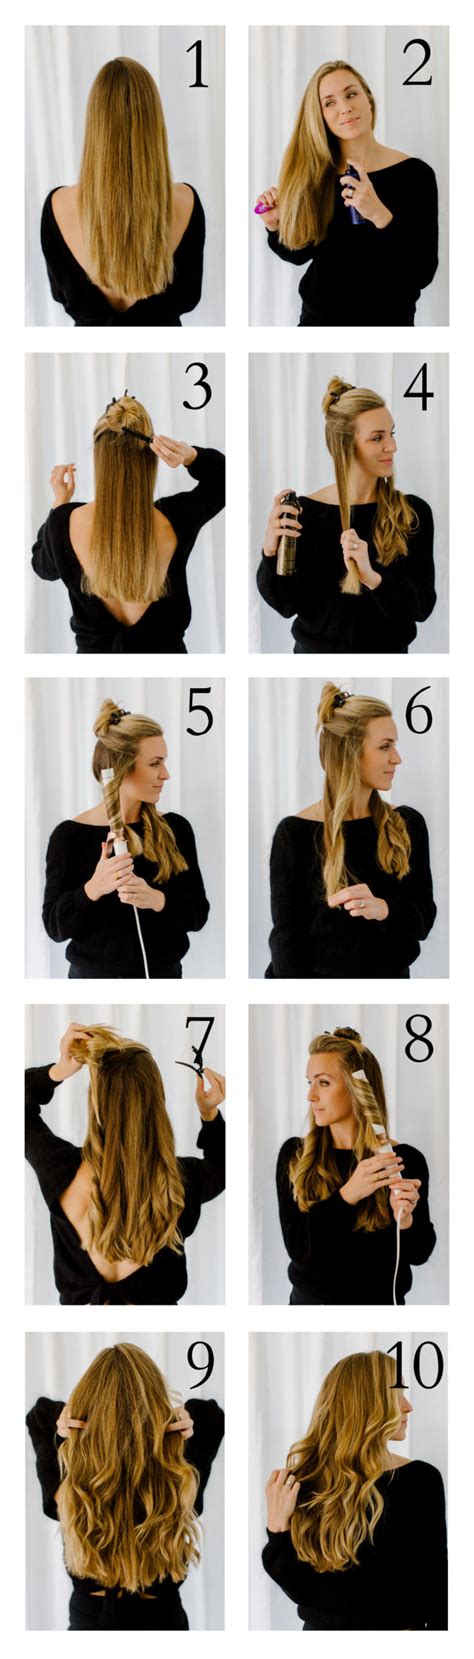 How To Get Loose Curls In 10 Minutes Natalie Yerger My Star Idea